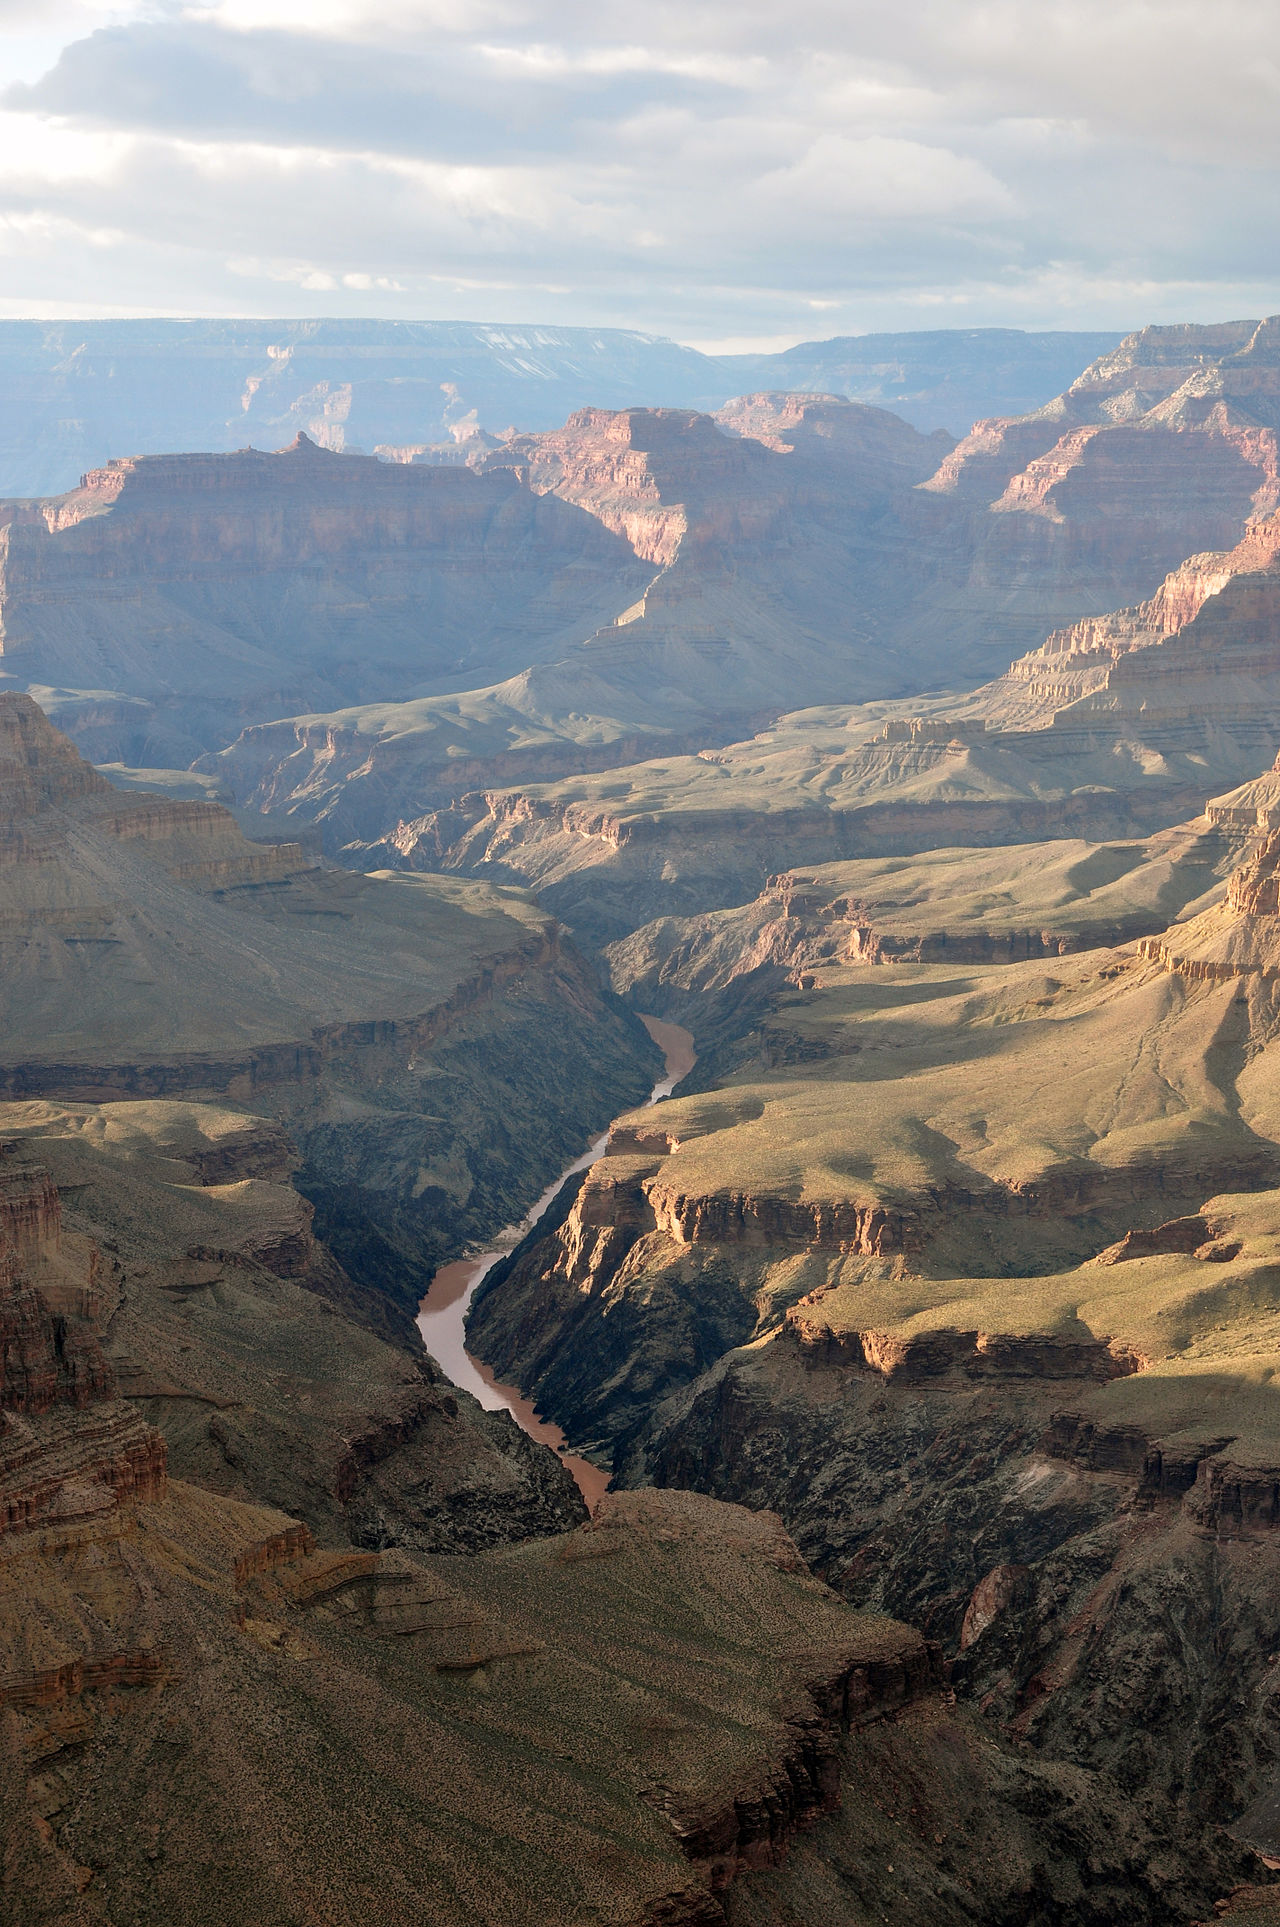 1280px-Grand_Canyon_view_from_Pima_Point_2010.jpg